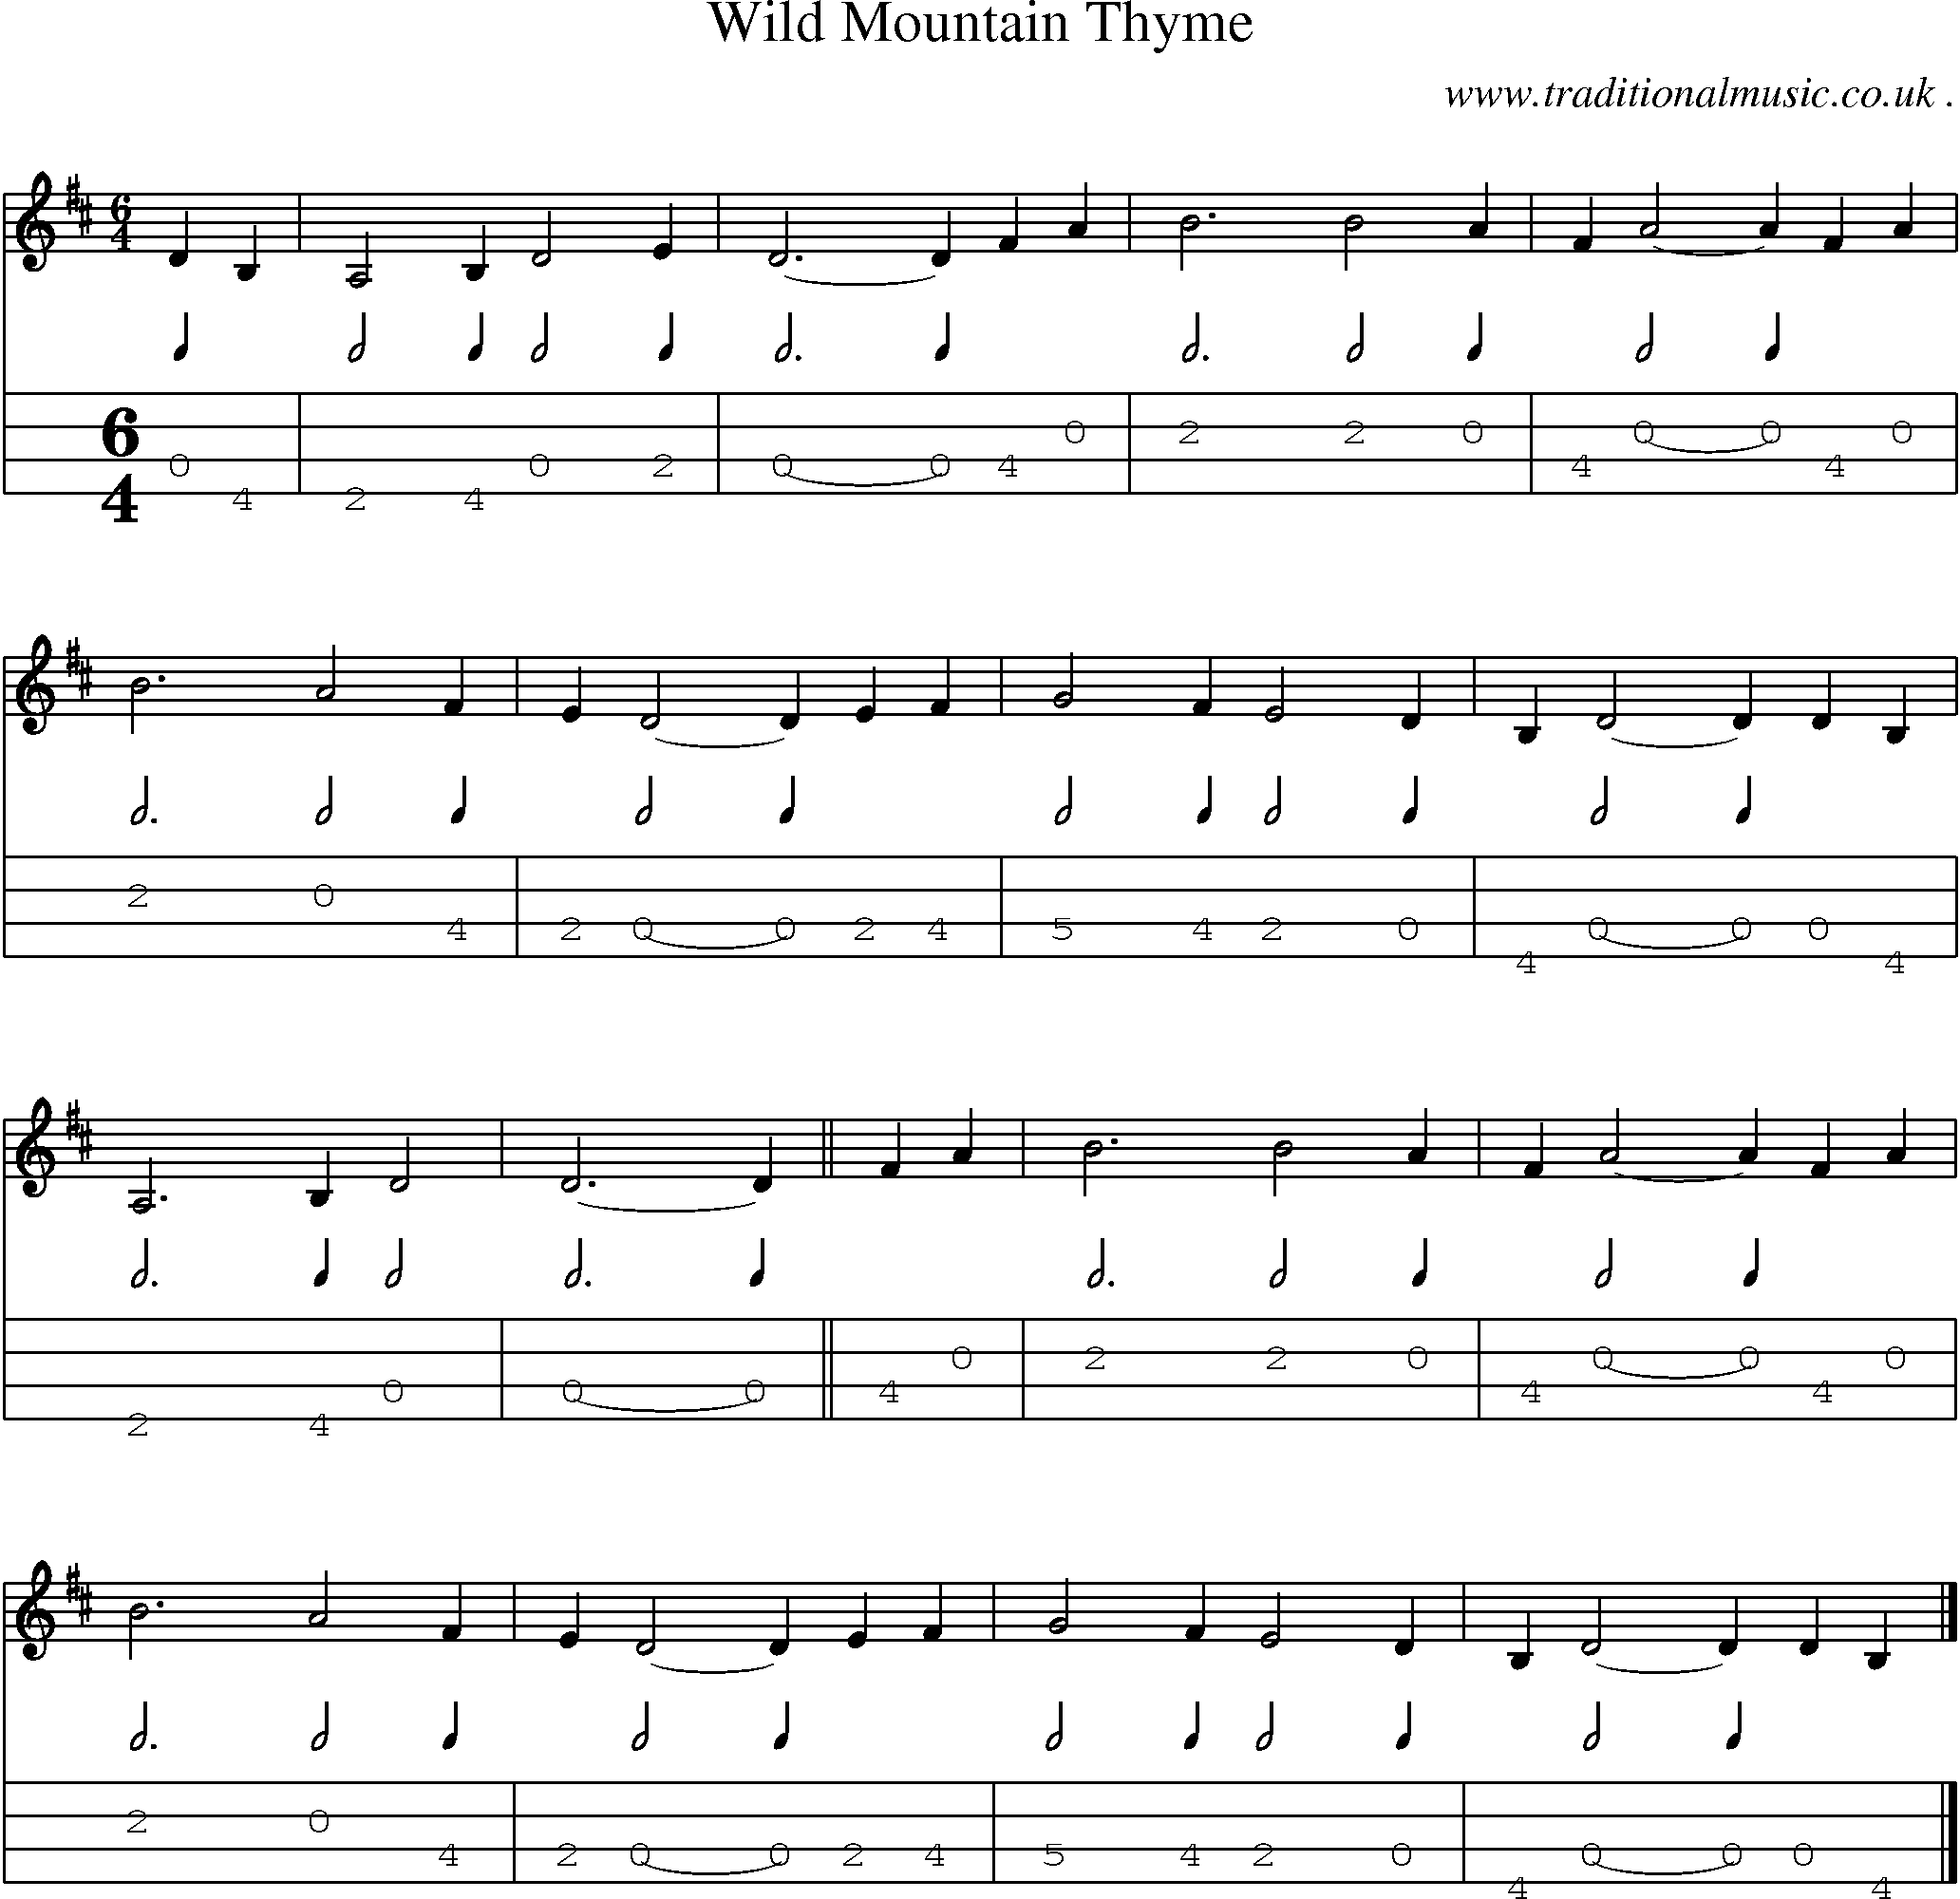 Sheet-music  score, Chords and Mandolin Tabs for Wild Mountain Thyme